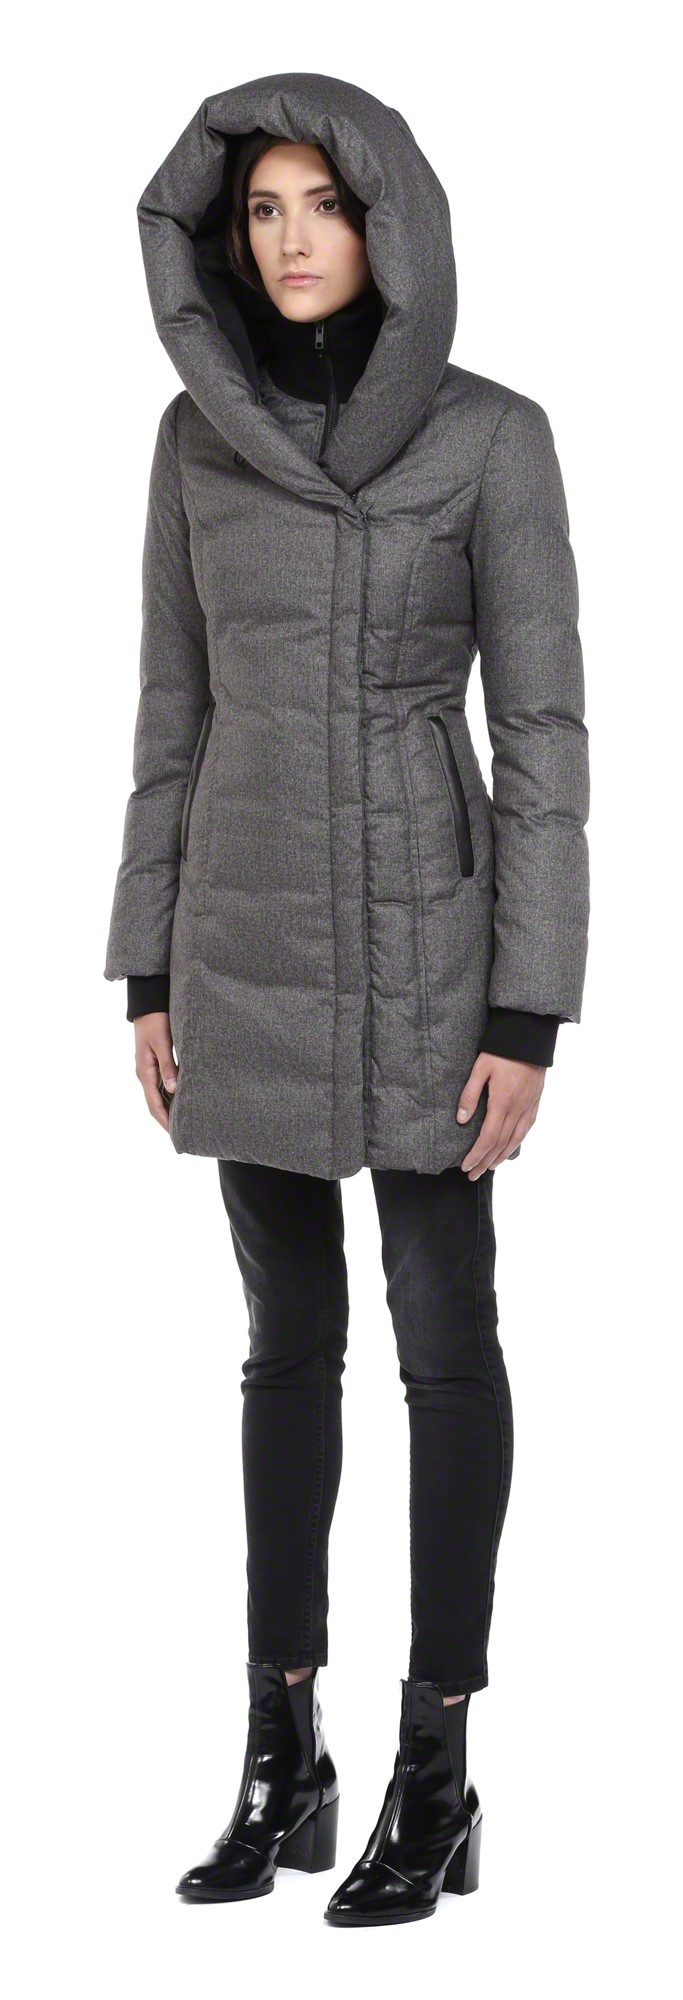 Lyst - Soia & Kyo Camyl Grey Winter Down Coat With Large Hood in Gray